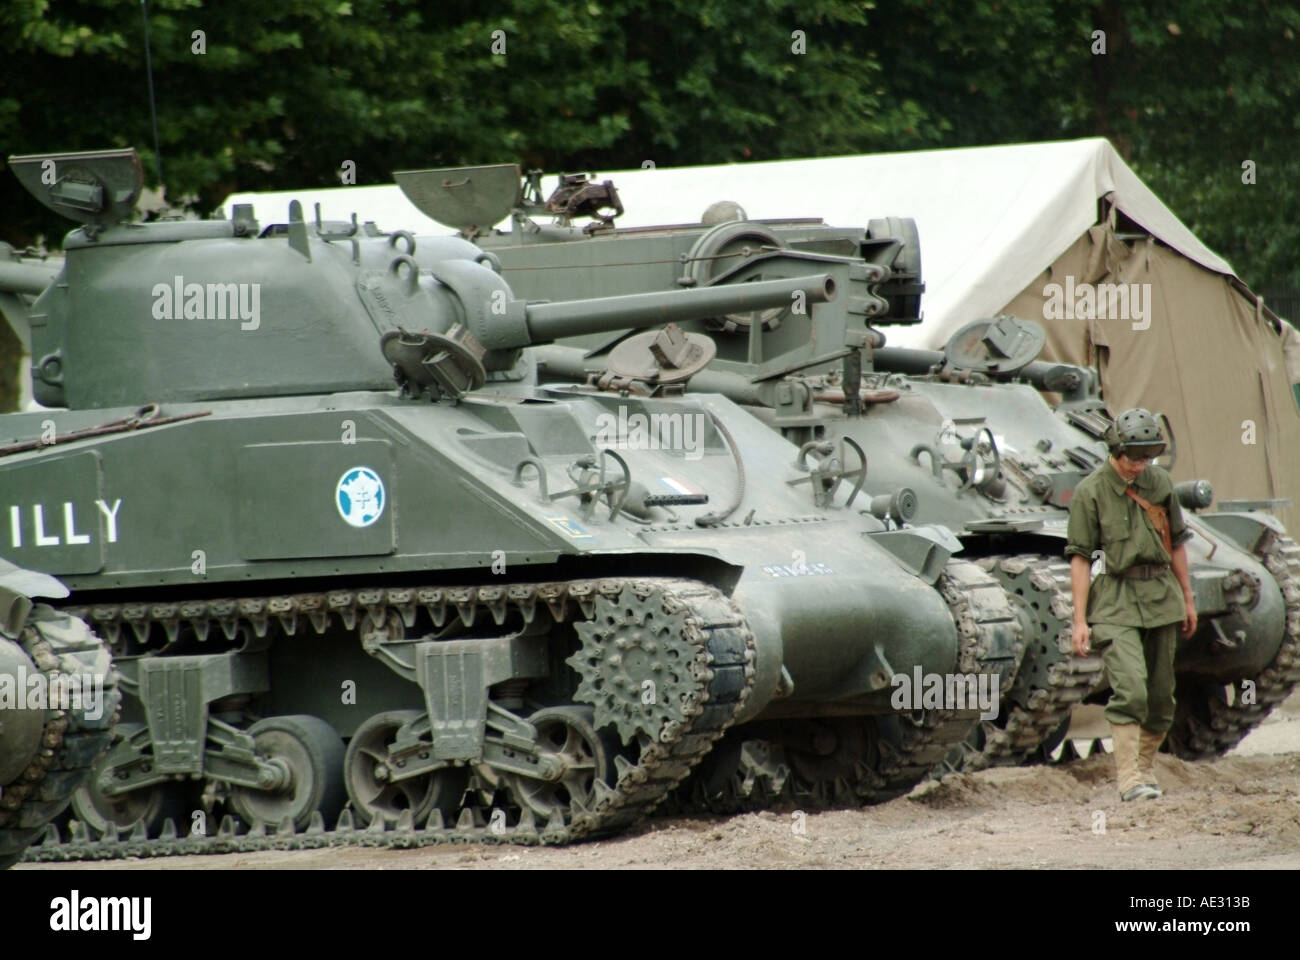 france maine et loire saumur tanks from the tank museum Musee des blindes taking part in festival  Stock Photo